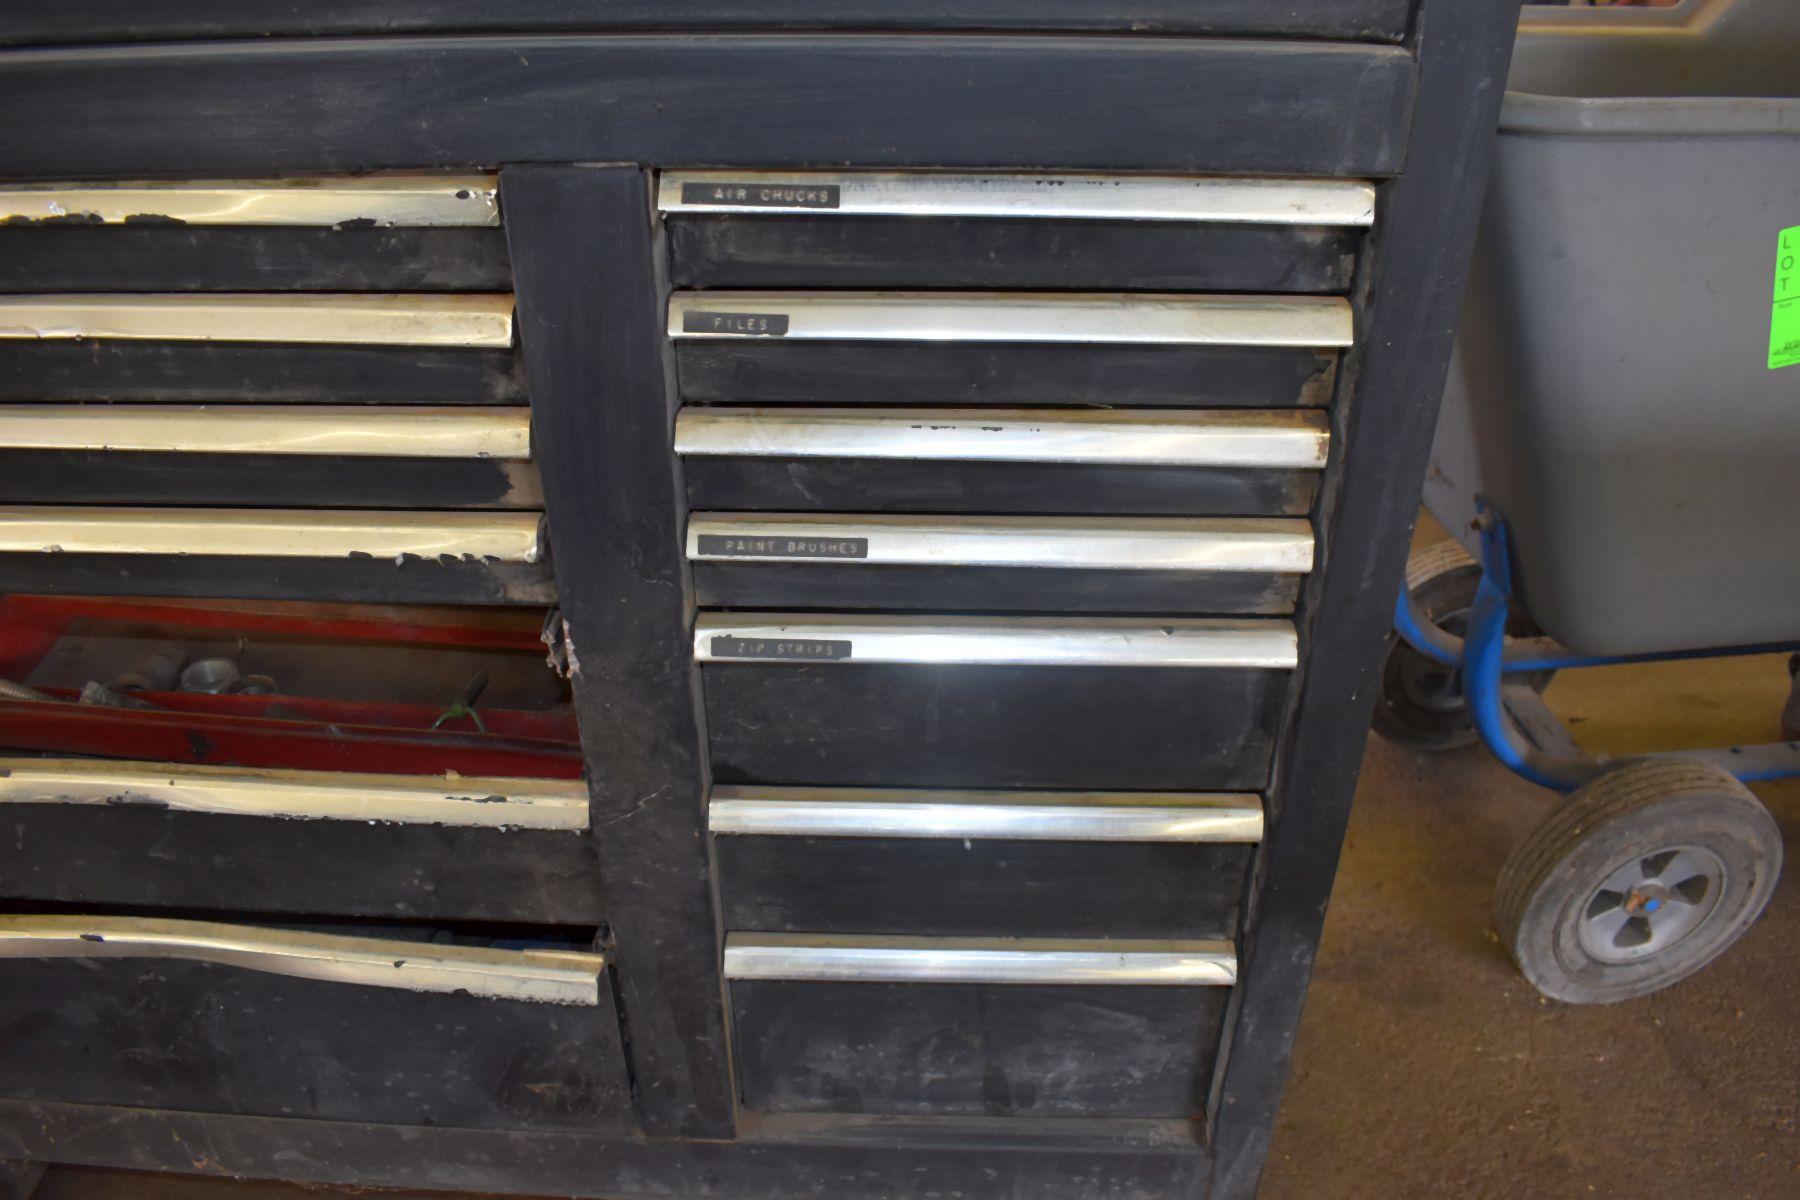 GM Goodwrench Roller Tool Chest, Missing One Drawer